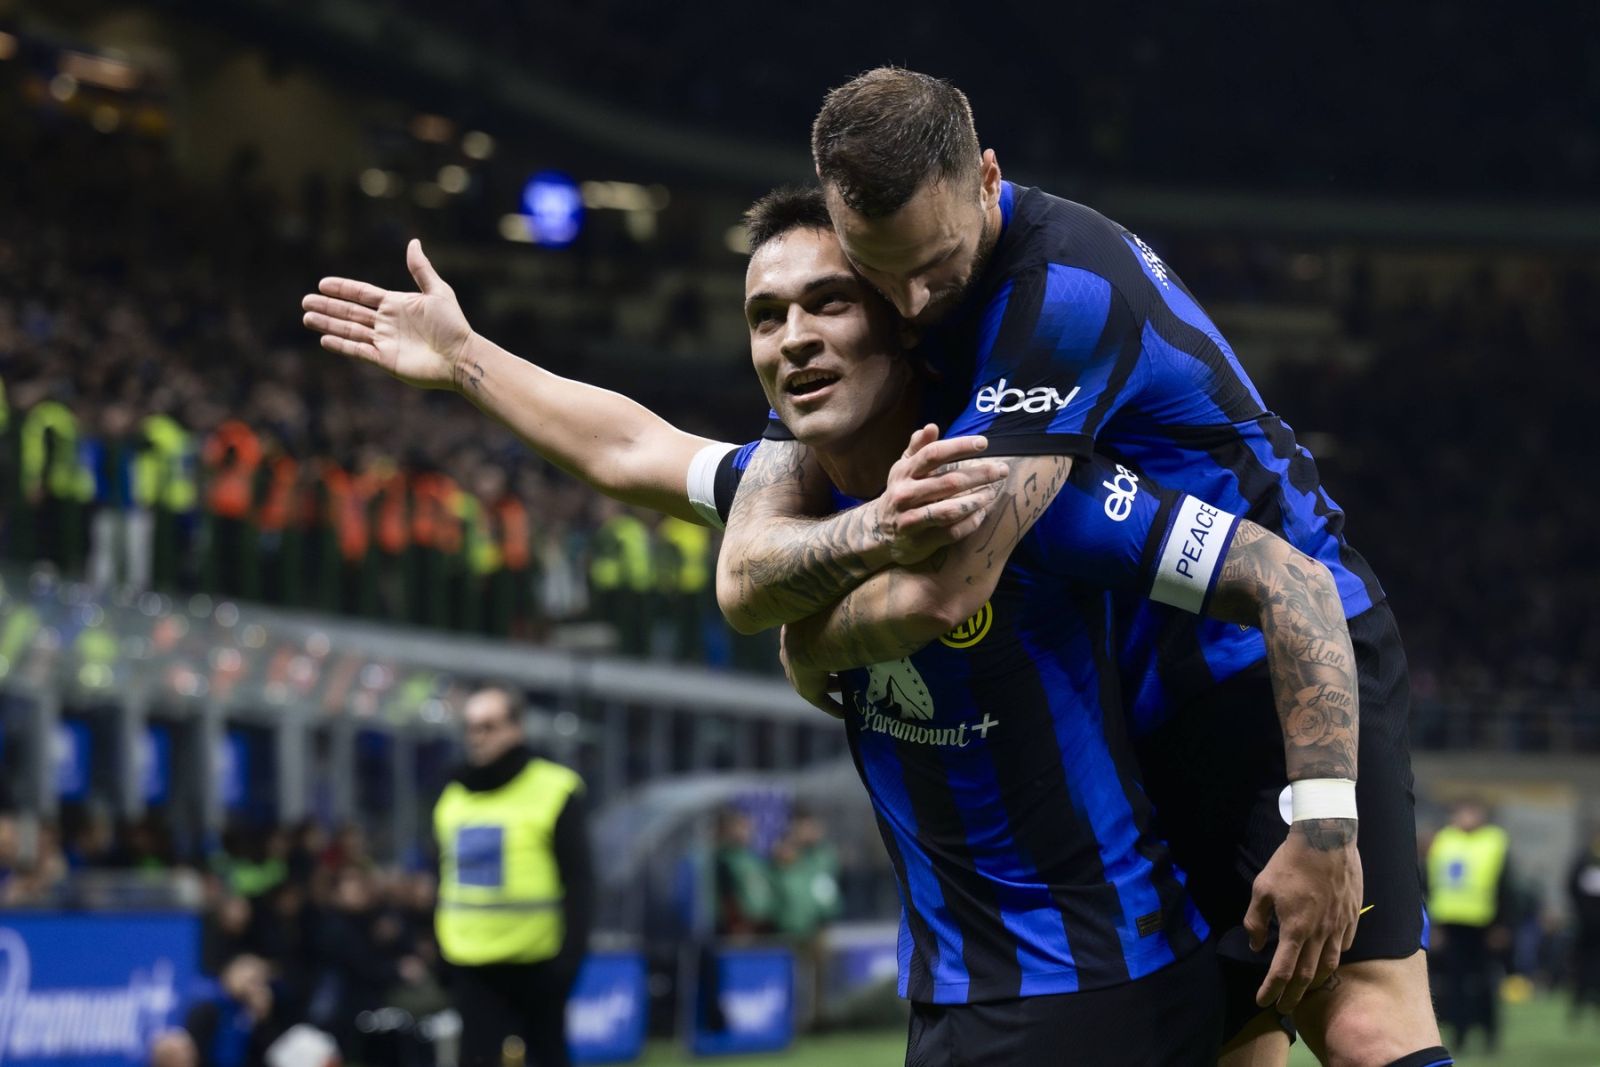 FC Internazionale v Atalanta BC - Serie A Lautaro Martinez of FC Internazionale celebrates with Marko Arnautovic of FC Internazionale after scoring a goal during the Serie A football match between FC Internazionale and Atalanta BC. Milan Italy Copyright: xNicolňxCampox,Image: 852260484, License: Rights-managed, Restrictions: Credit images as "Profimedia/ IMAGO", Model Release: no, Credit line: IMAGO / imago sportfotodienst / Profimedia